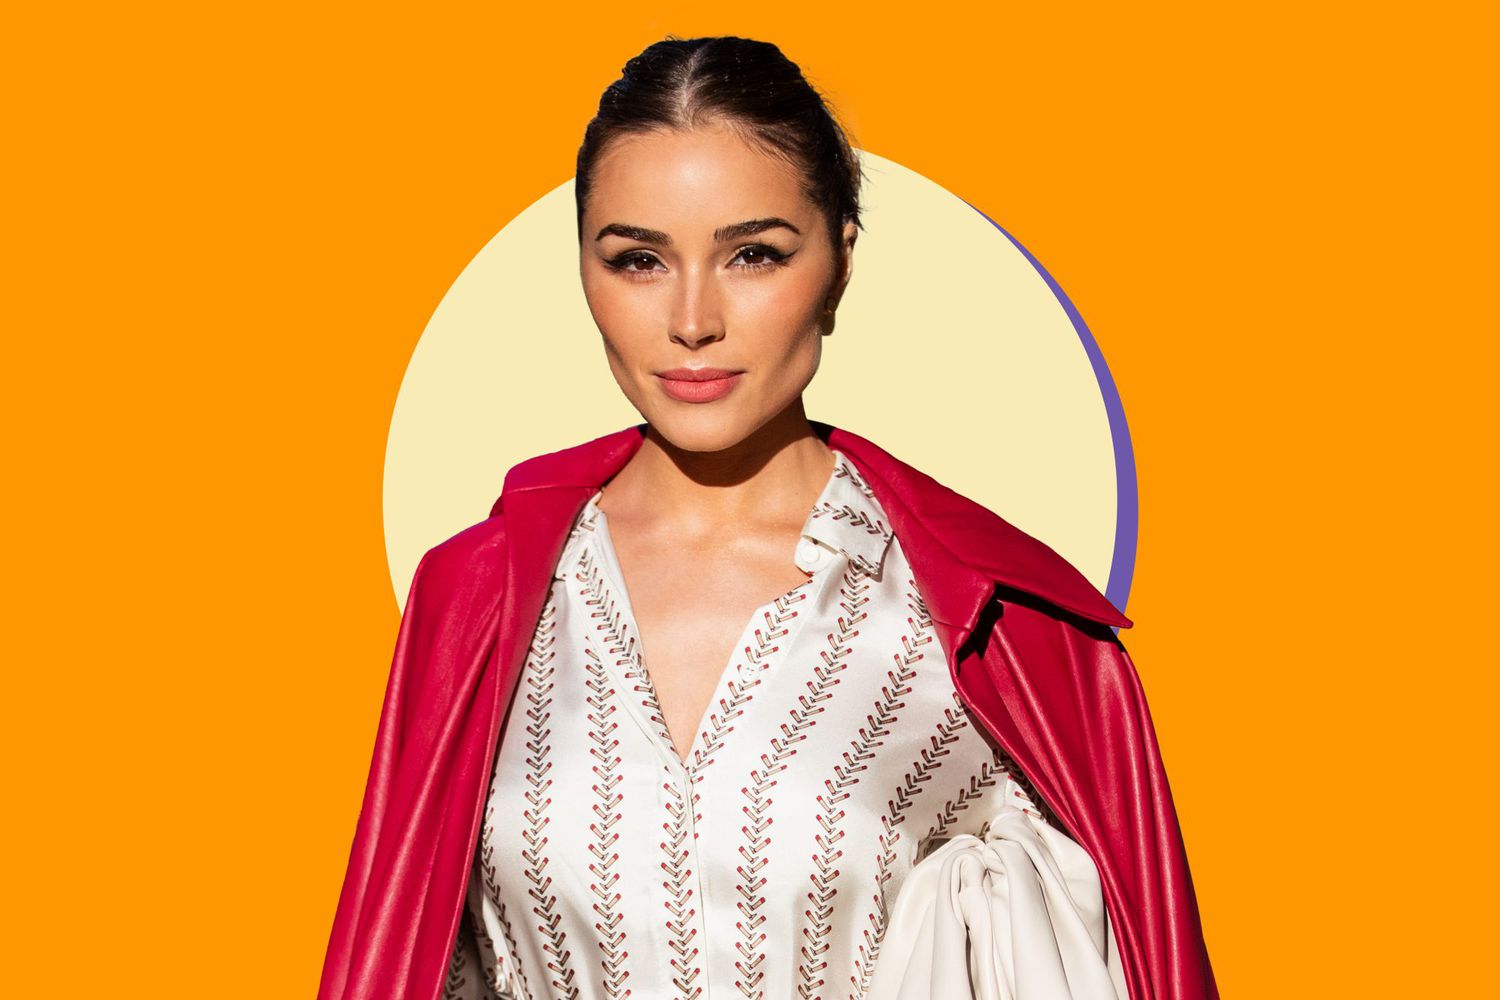 Olivia-Culpo-Current-Beauty-Obsessions-GettyImages-1208238201